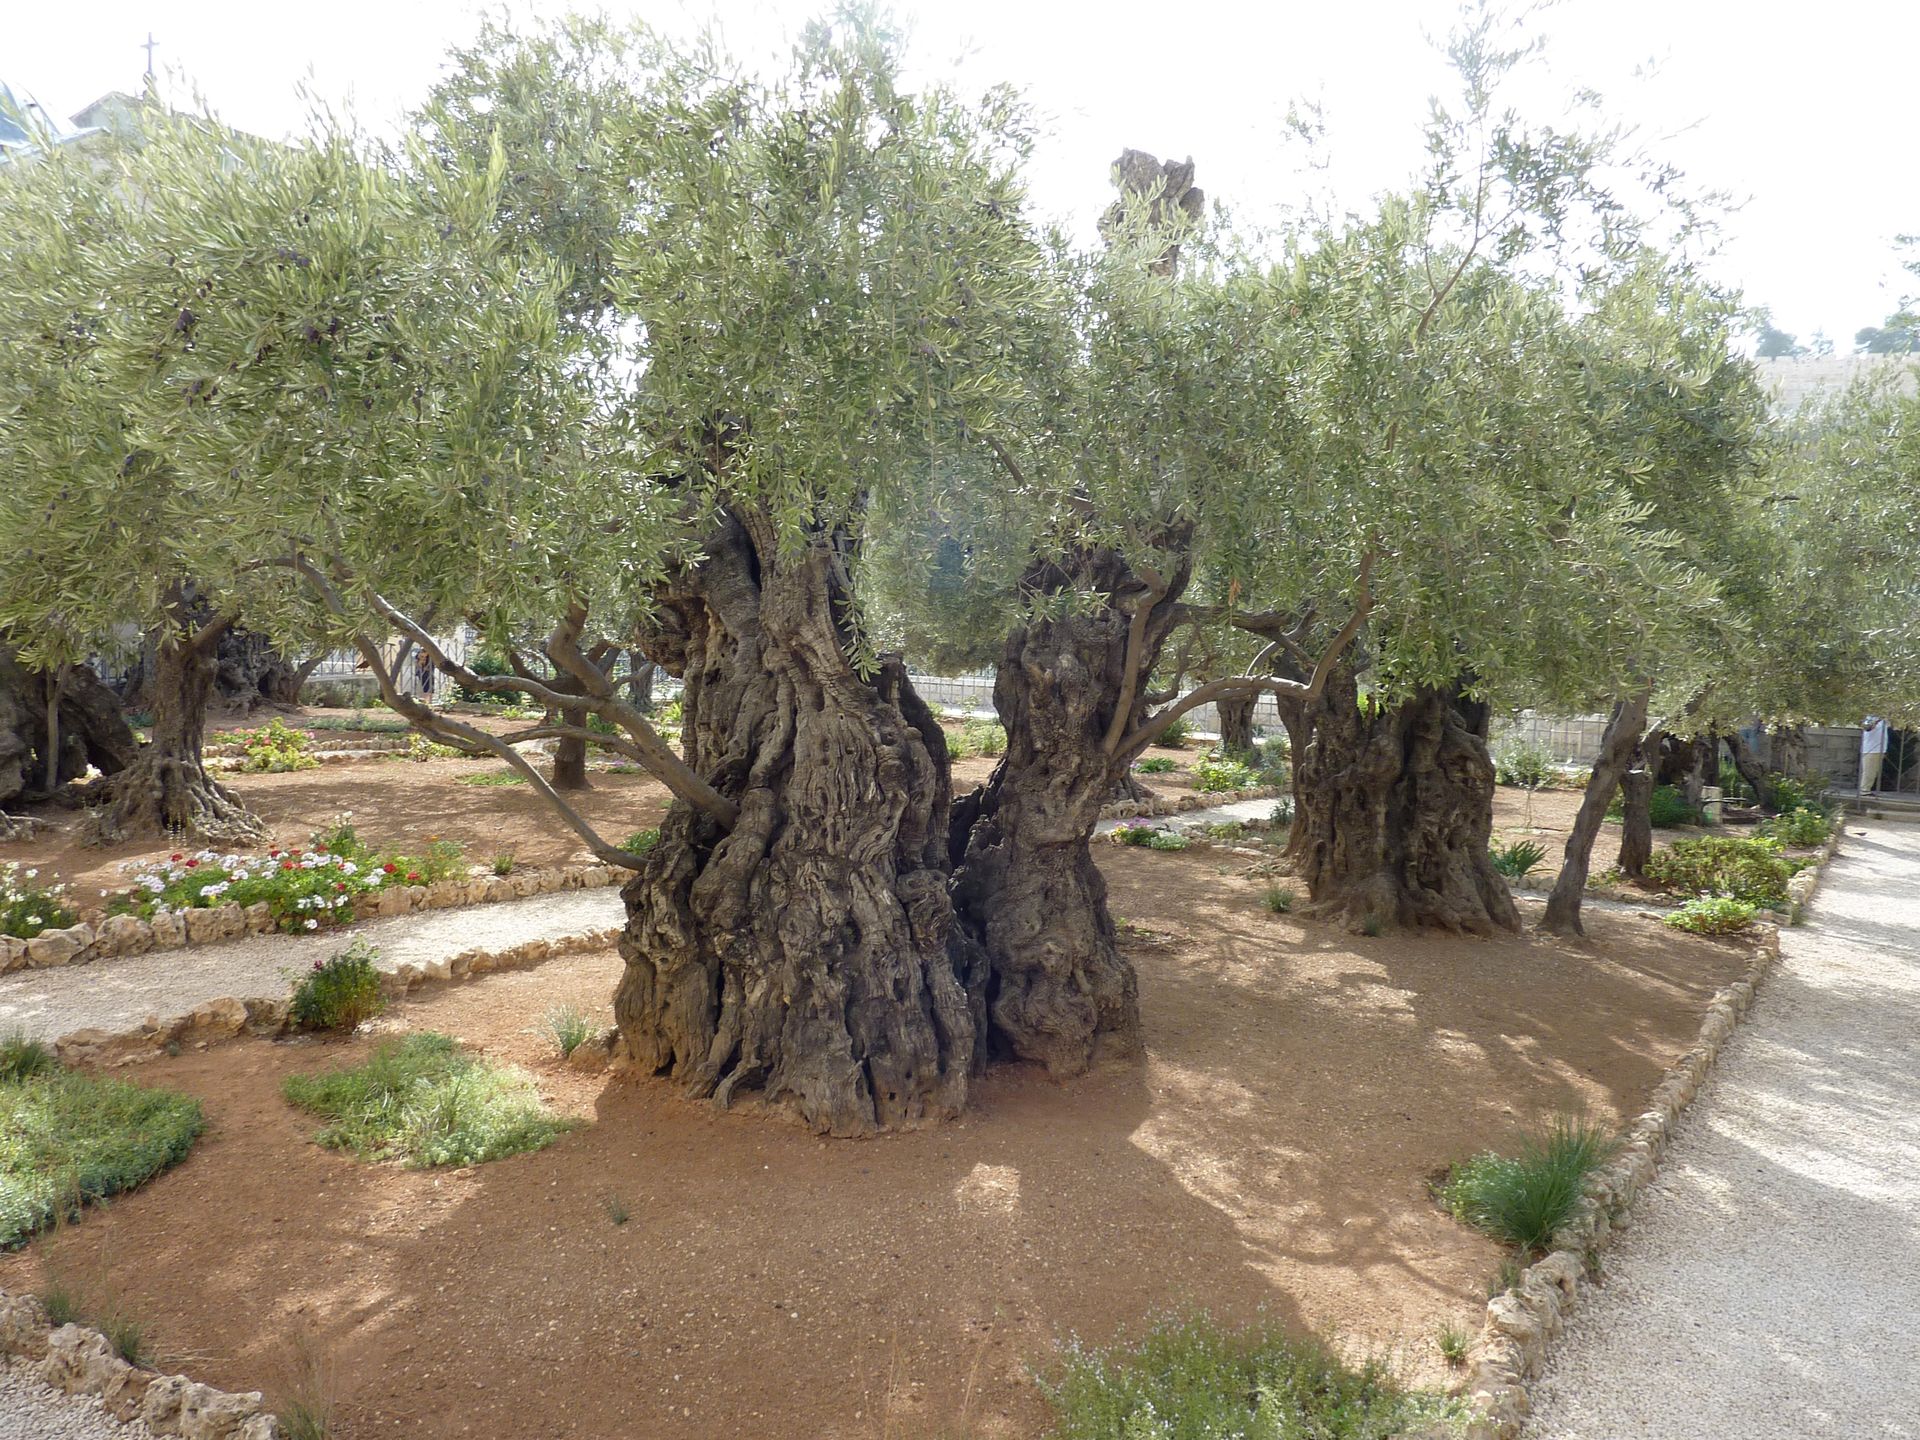 Olive trees at the Garden of Gethsemane.